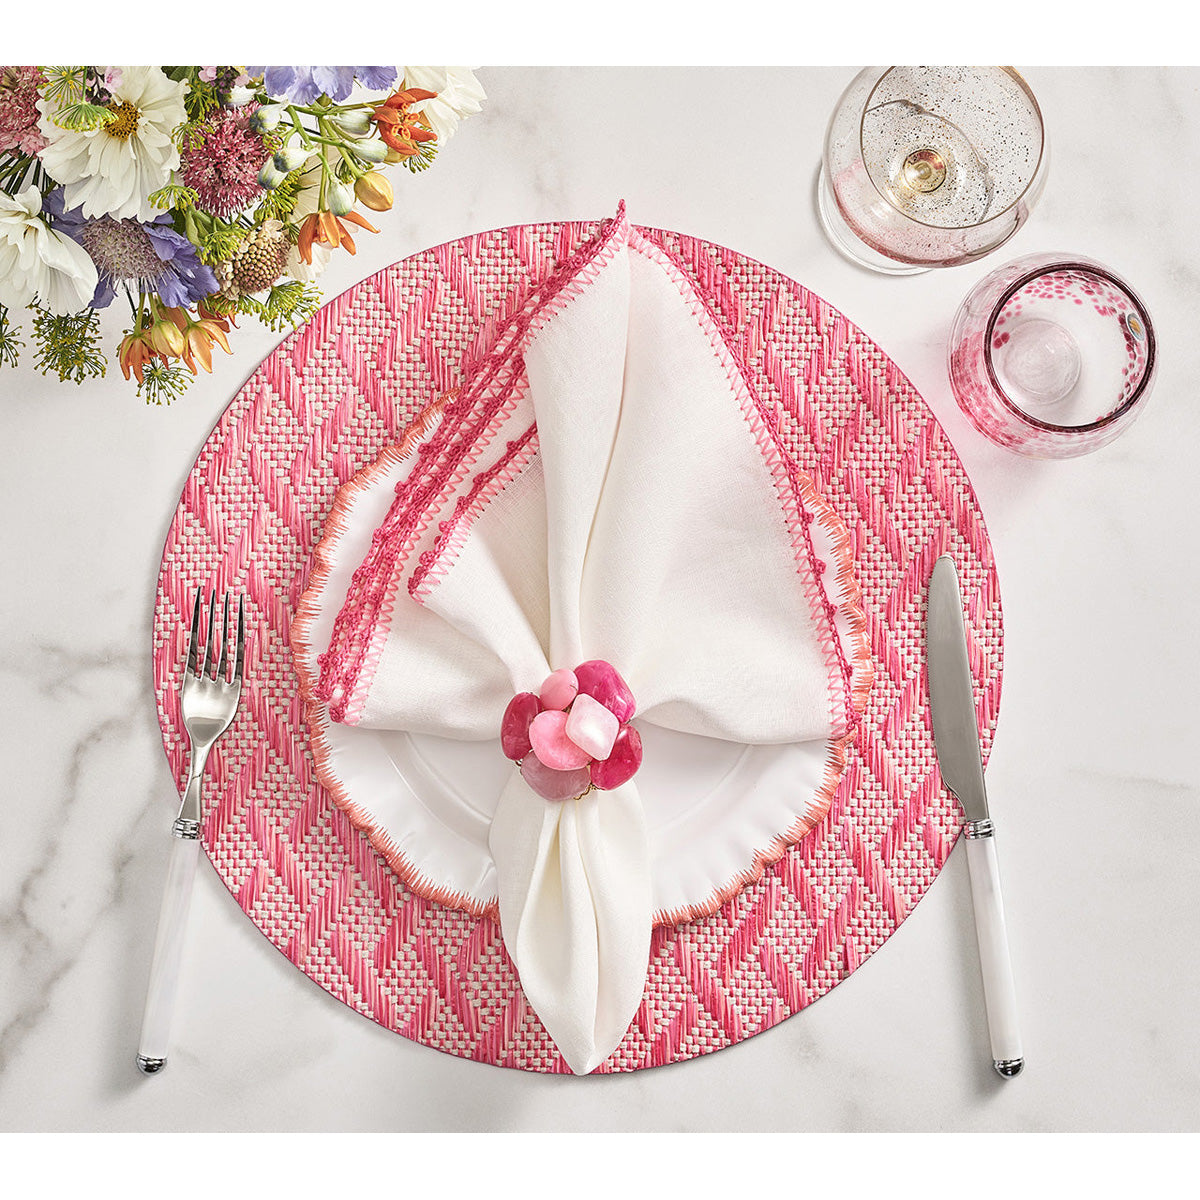 Knotted Edge Napkin - Set of 4 by Kim Seybert Additional Image-27